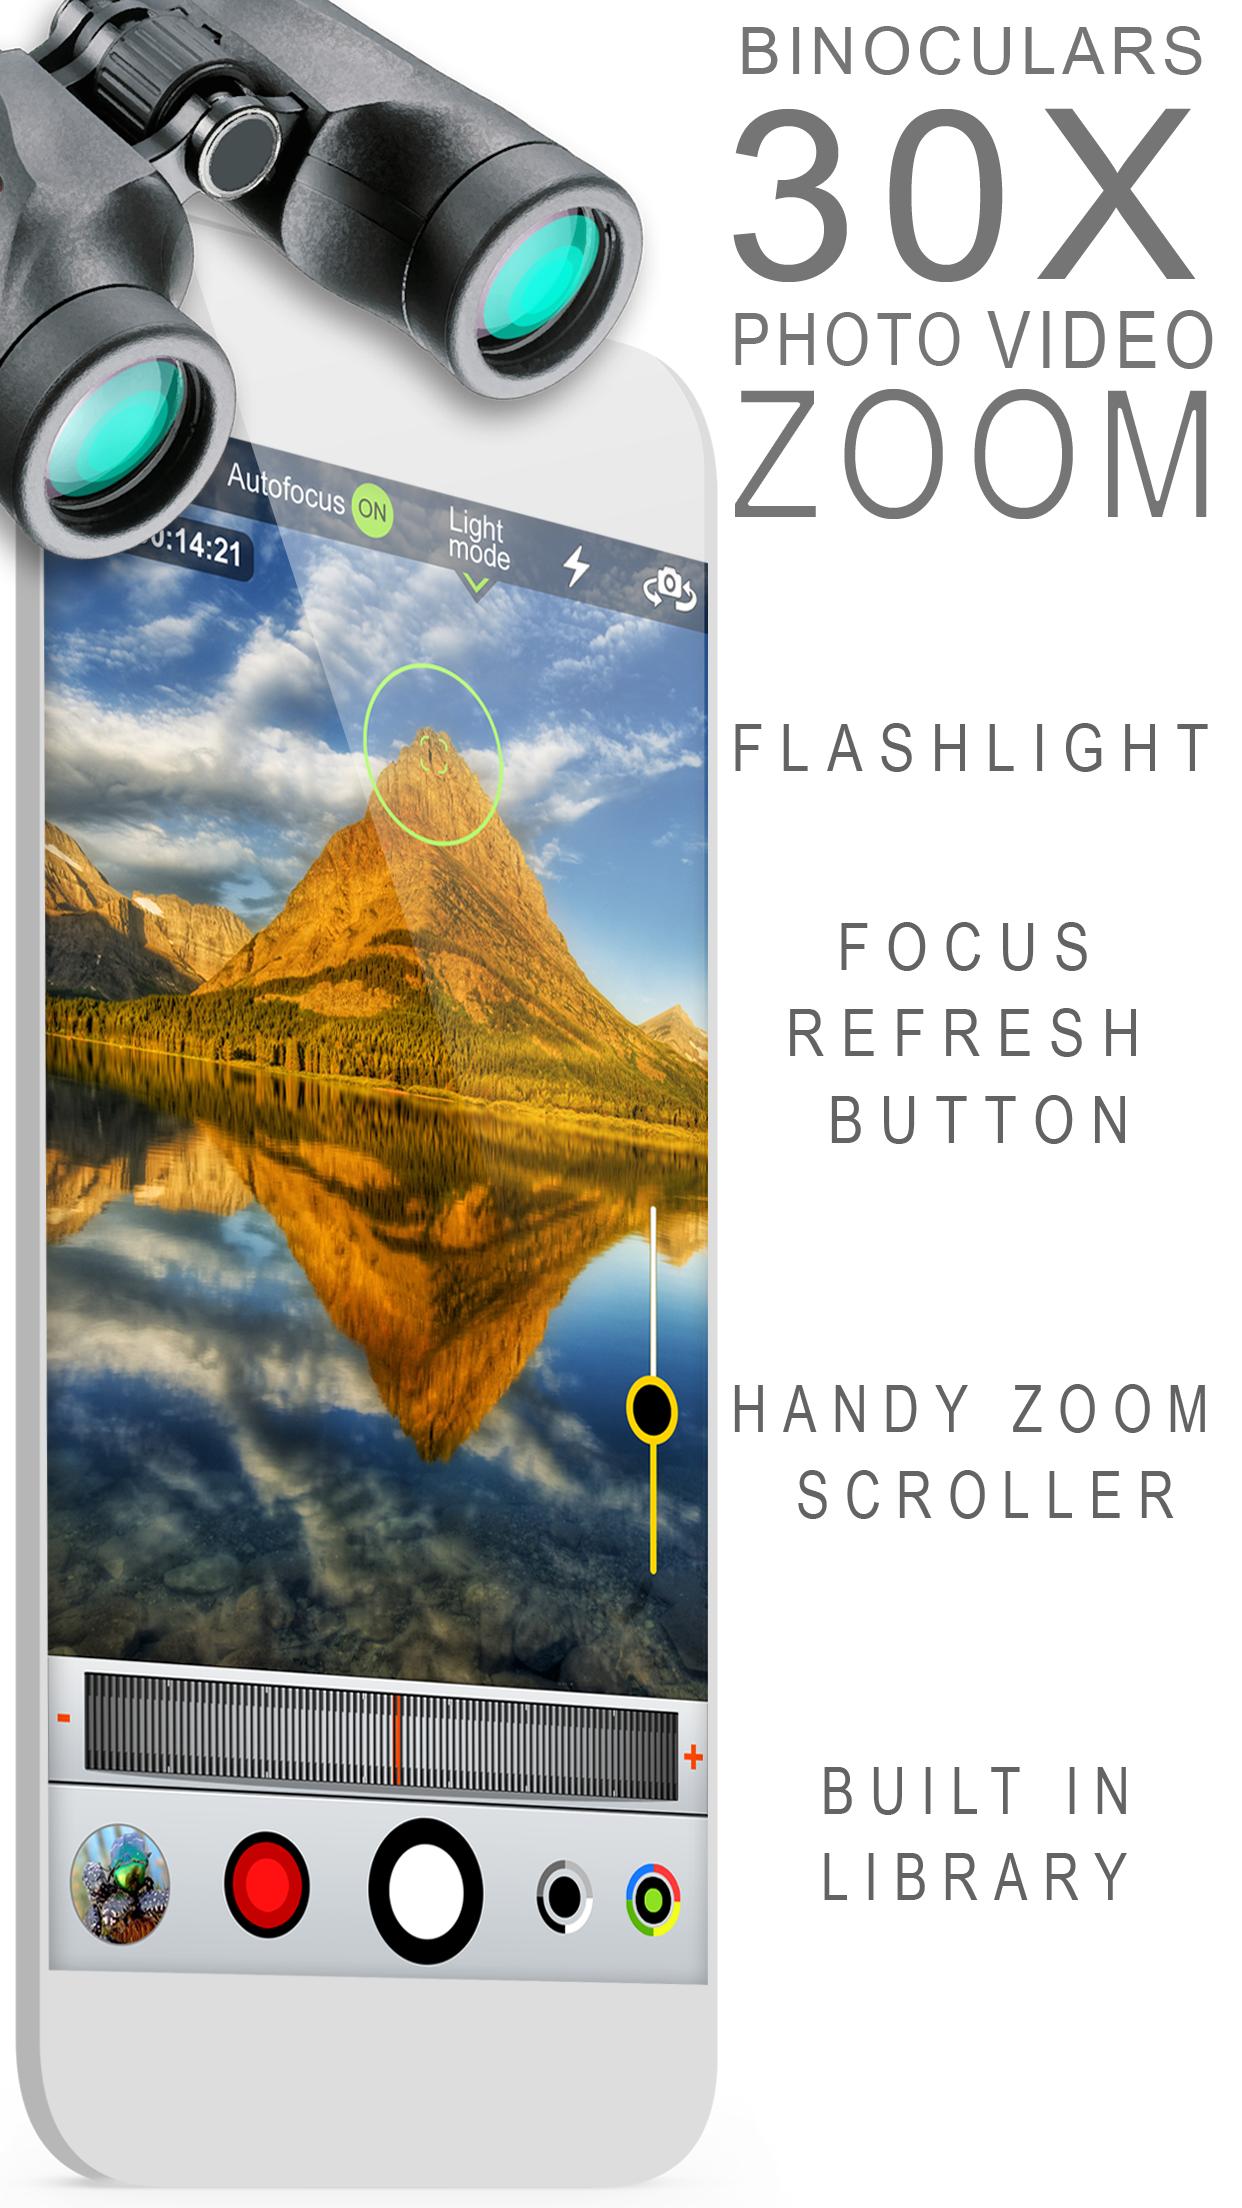 Binoculars 30x Zoom 1.3.4 APK Download - Android Photography Apps